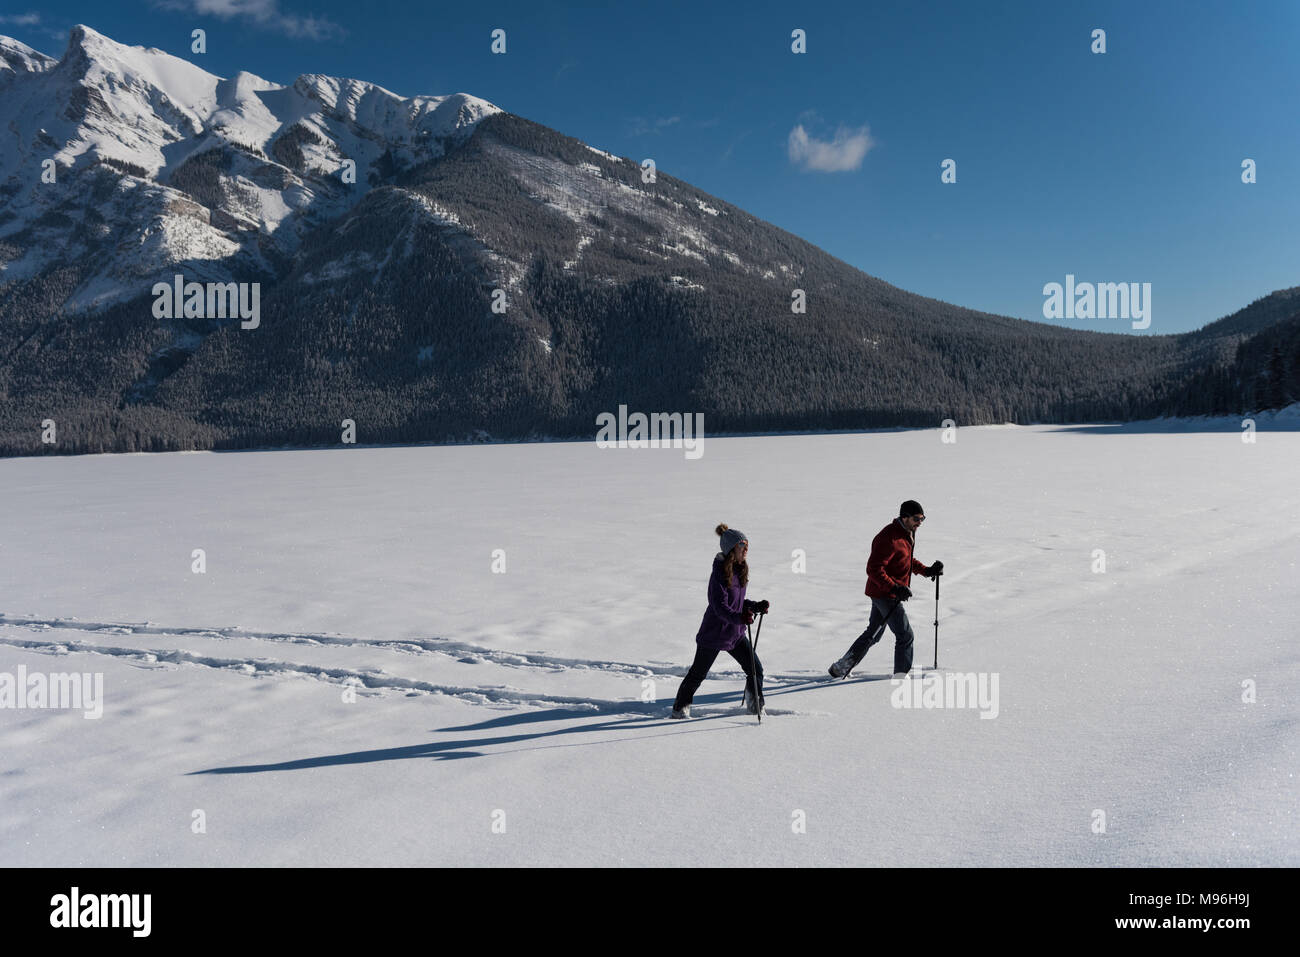 Couple walking together in snowy landscape Stock Photo